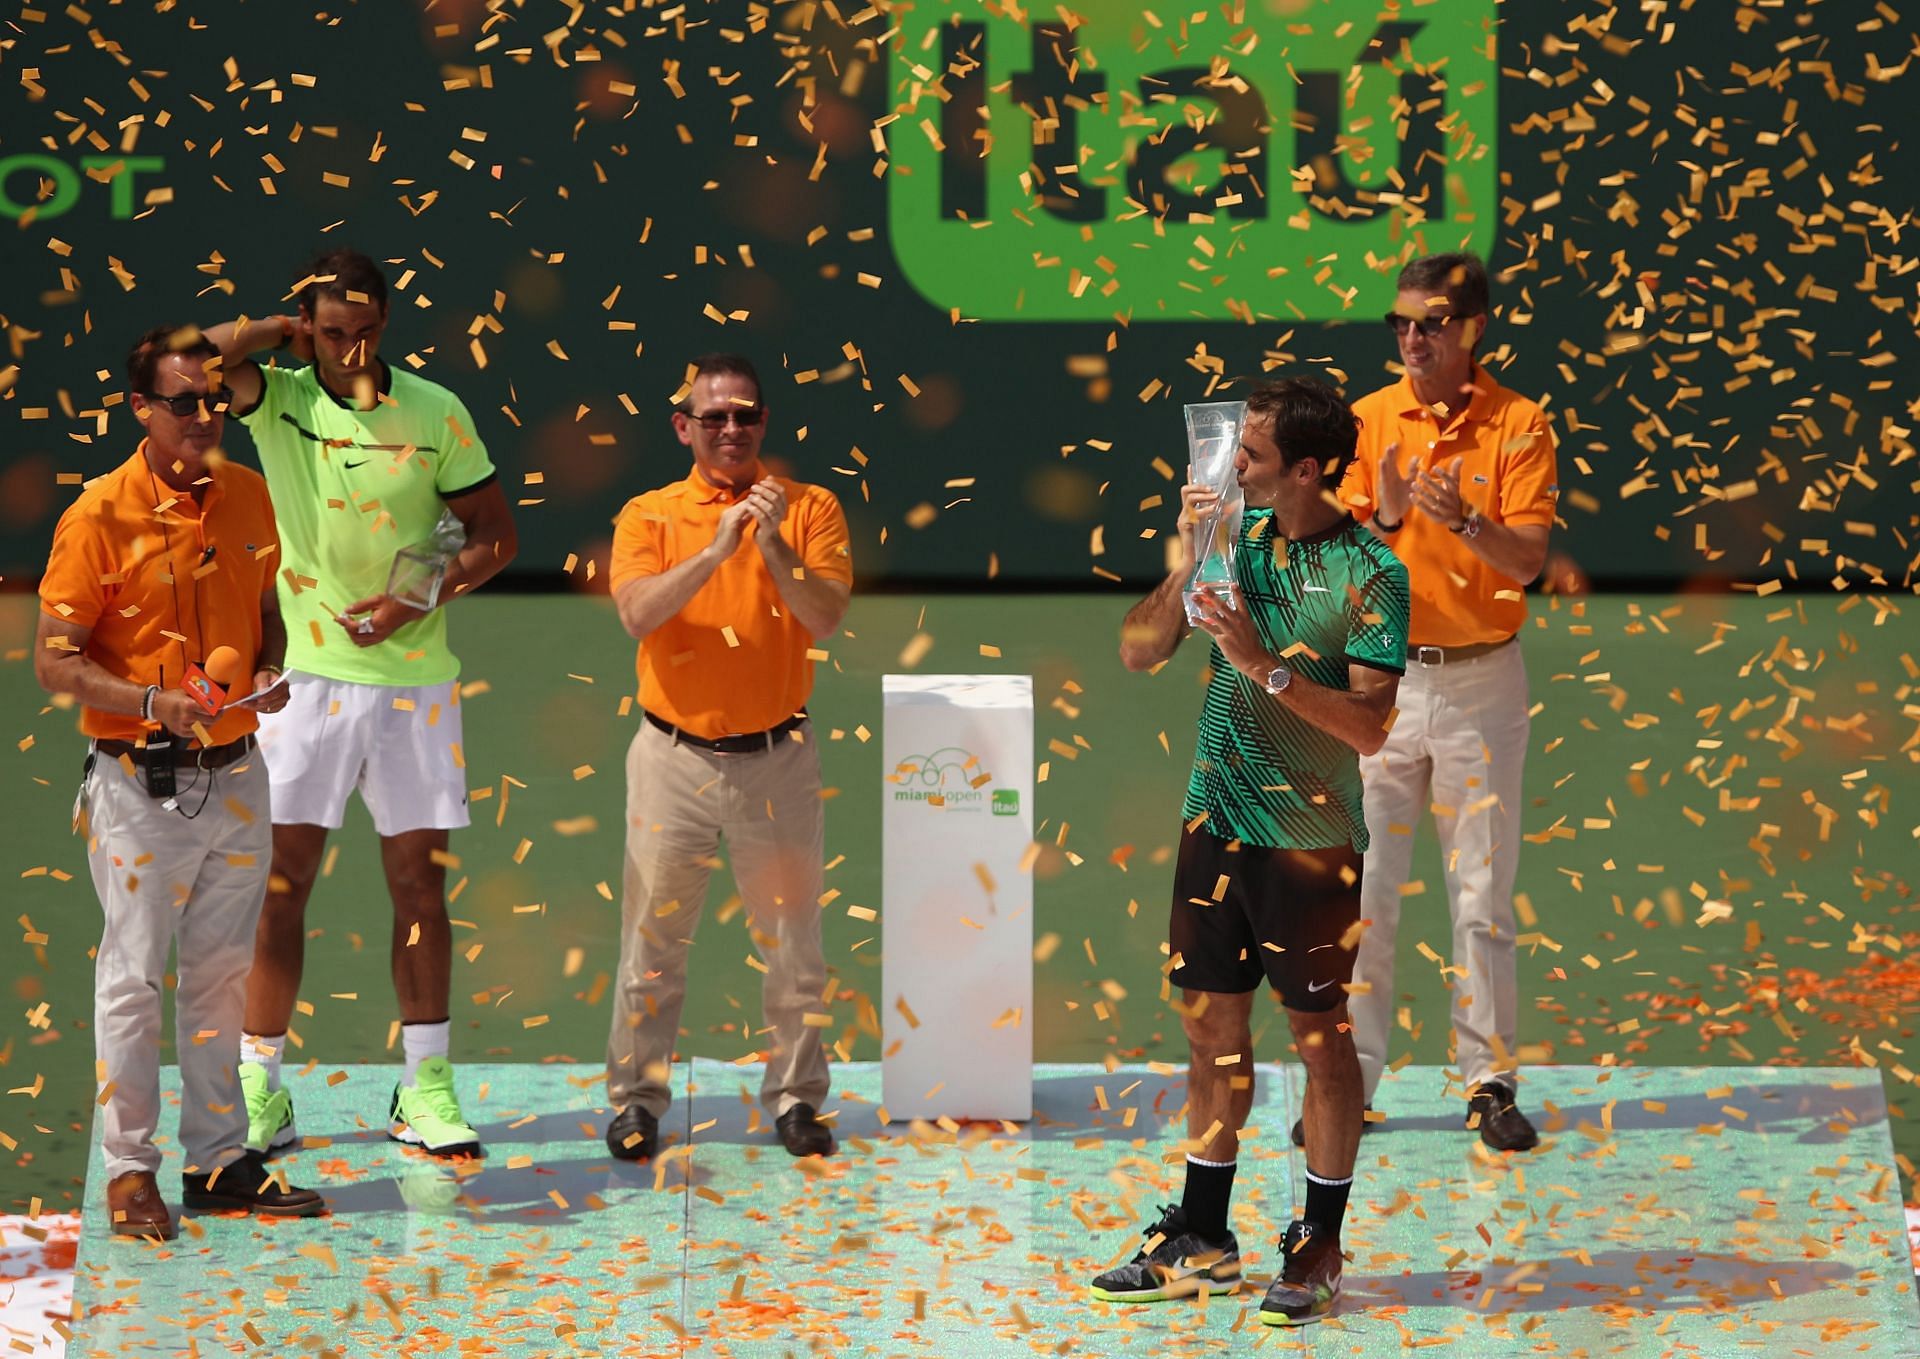 Rafael Nadal, after losing the 2017 Miami Open final to Roger Federer